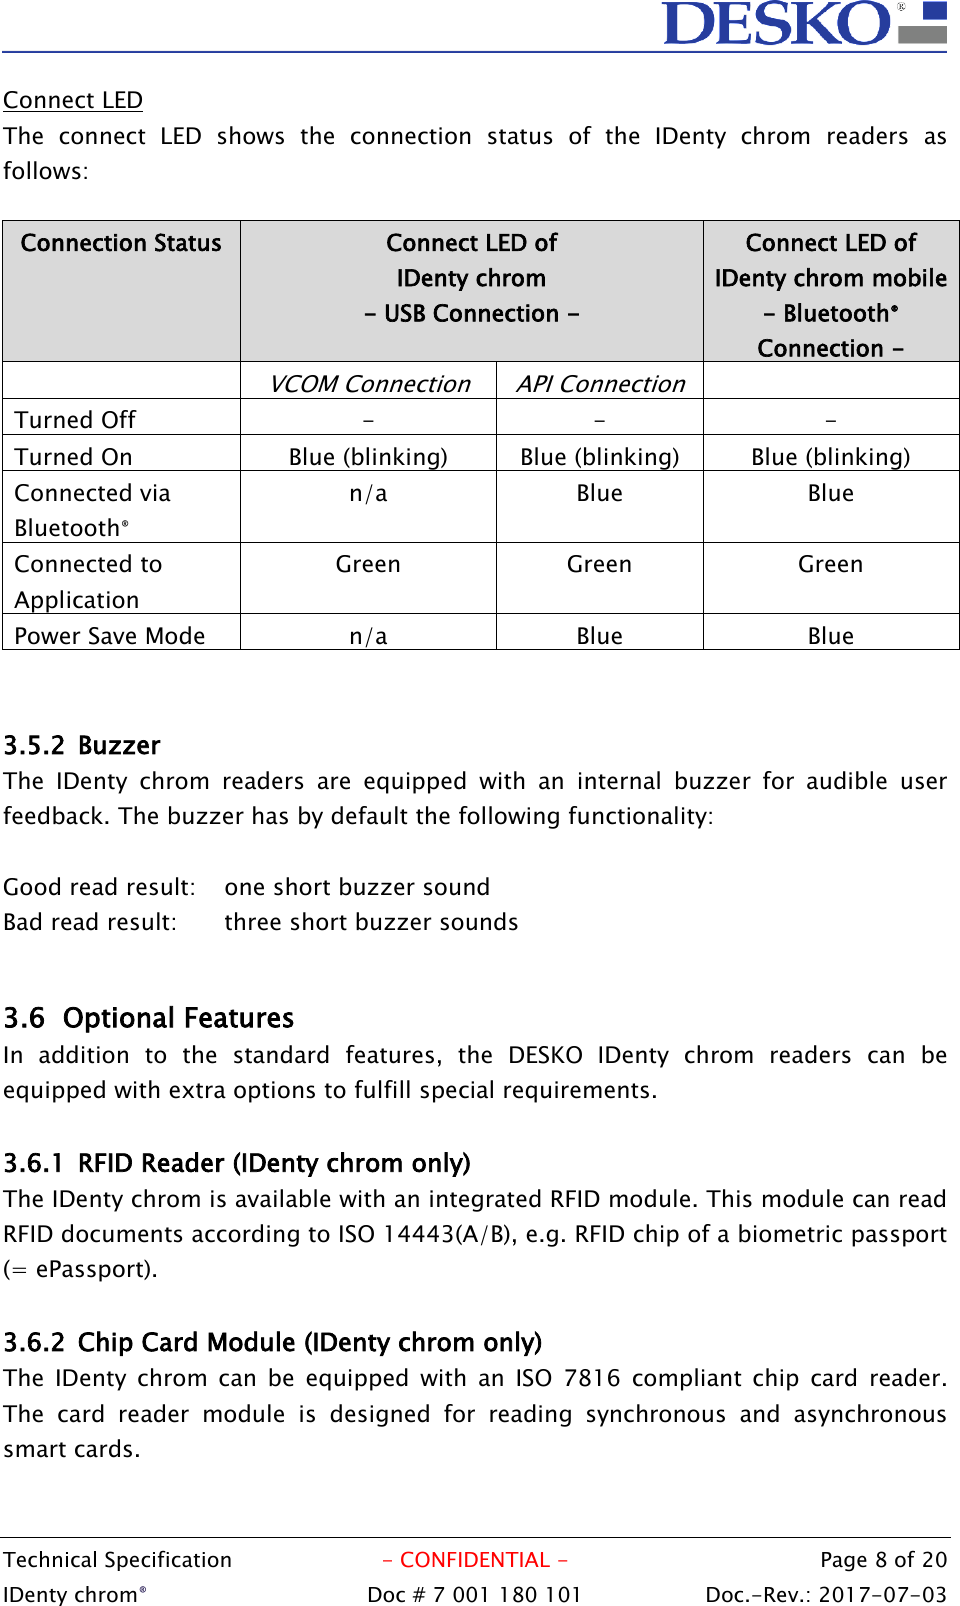  Technical Specification  - CONFIDENTIAL -  Page 8 of 20 IDenty chrom®  Doc # 7 001 180 101   Doc.-Rev.: 2017-07-03   Connect LED The  connect  LED  shows  the  connection  status  of  the  IDenty  chrom  readers  as follows:  Connection Status Connect LED of  IDenty chrom  - USB Connection - Connect LED of  IDenty chrom mobile - Bluetooth® Connection -  VCOM Connection API Connection  Turned Off - - - Turned On Blue (blinking) Blue (blinking) Blue (blinking) Connected via Bluetooth® n/a Blue Blue Connected to Application Green Green Green Power Save Mode n/a Blue Blue   3.5.2 Buzzer The  IDenty  chrom  readers  are  equipped  with  an  internal  buzzer  for  audible  user feedback. The buzzer has by default the following functionality:  Good read result:  one short buzzer sound Bad read result:  three short buzzer sounds  3.6 Optional Features In  addition  to  the  standard  features,  the  DESKO  IDenty  chrom  readers  can  be equipped with extra options to fulfill special requirements.  3.6.1 RFID Reader (IDenty chrom only) The IDenty chrom is available with an integrated RFID module. This module can read RFID documents according to ISO 14443(A/B), e.g. RFID chip of a biometric passport (= ePassport).  3.6.2 Chip Card Module (IDenty chrom only) The  IDenty  chrom  can  be  equipped  with  an  ISO  7816  compliant chip  card  reader. The  card  reader  module  is  designed  for  reading  synchronous  and  asynchronous smart cards.  